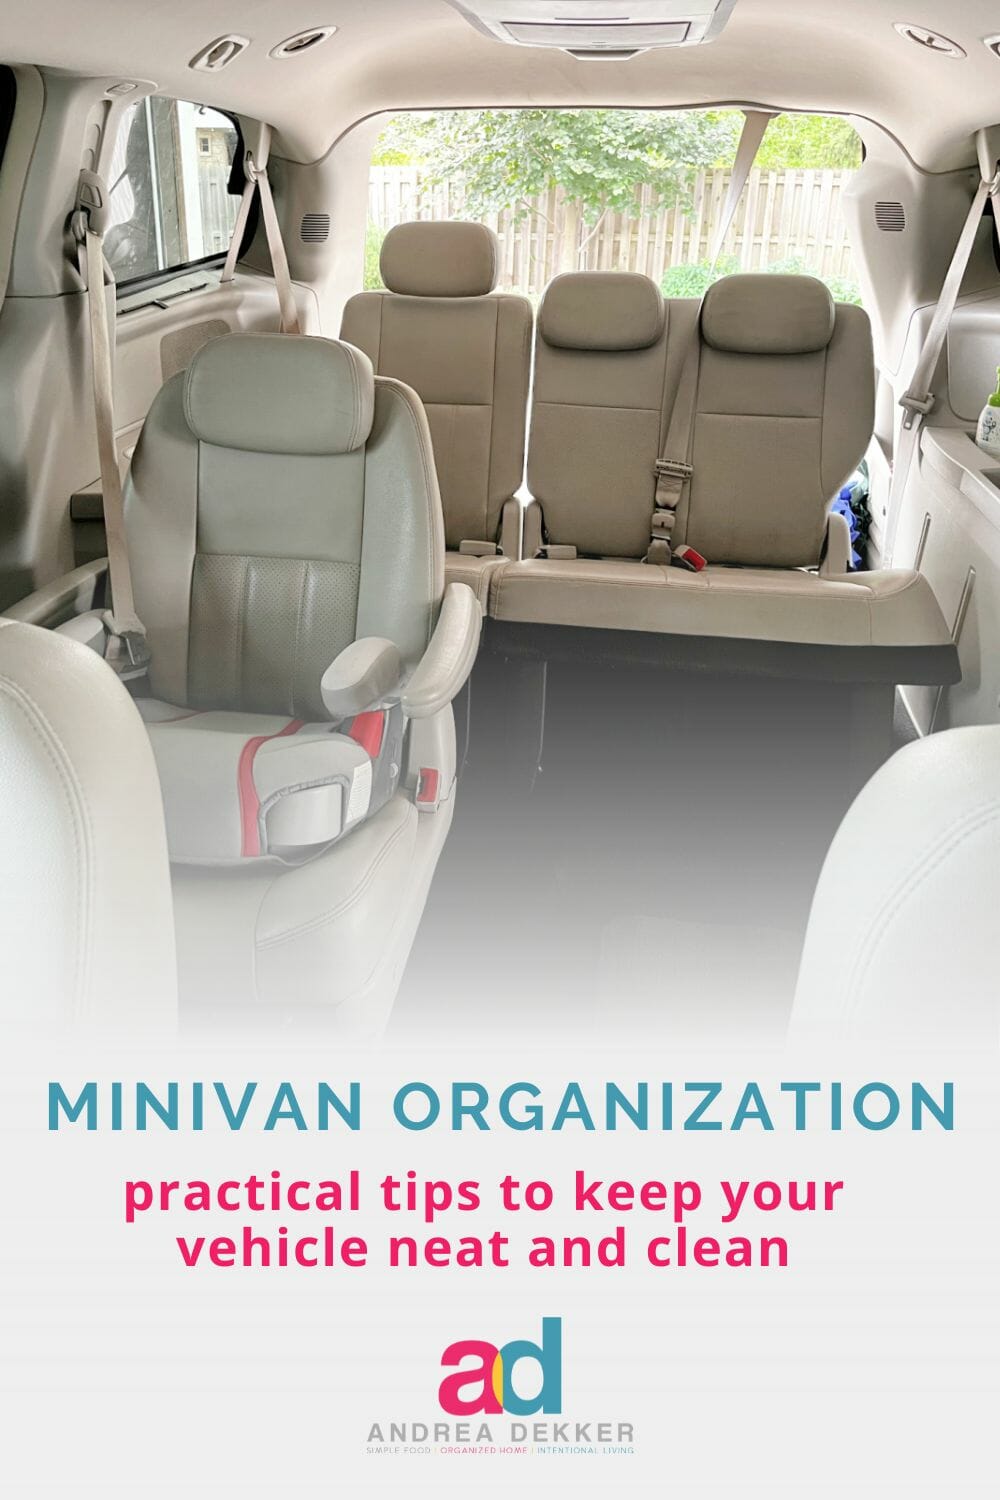 Tips for Keeping Your Car Clean With Kids